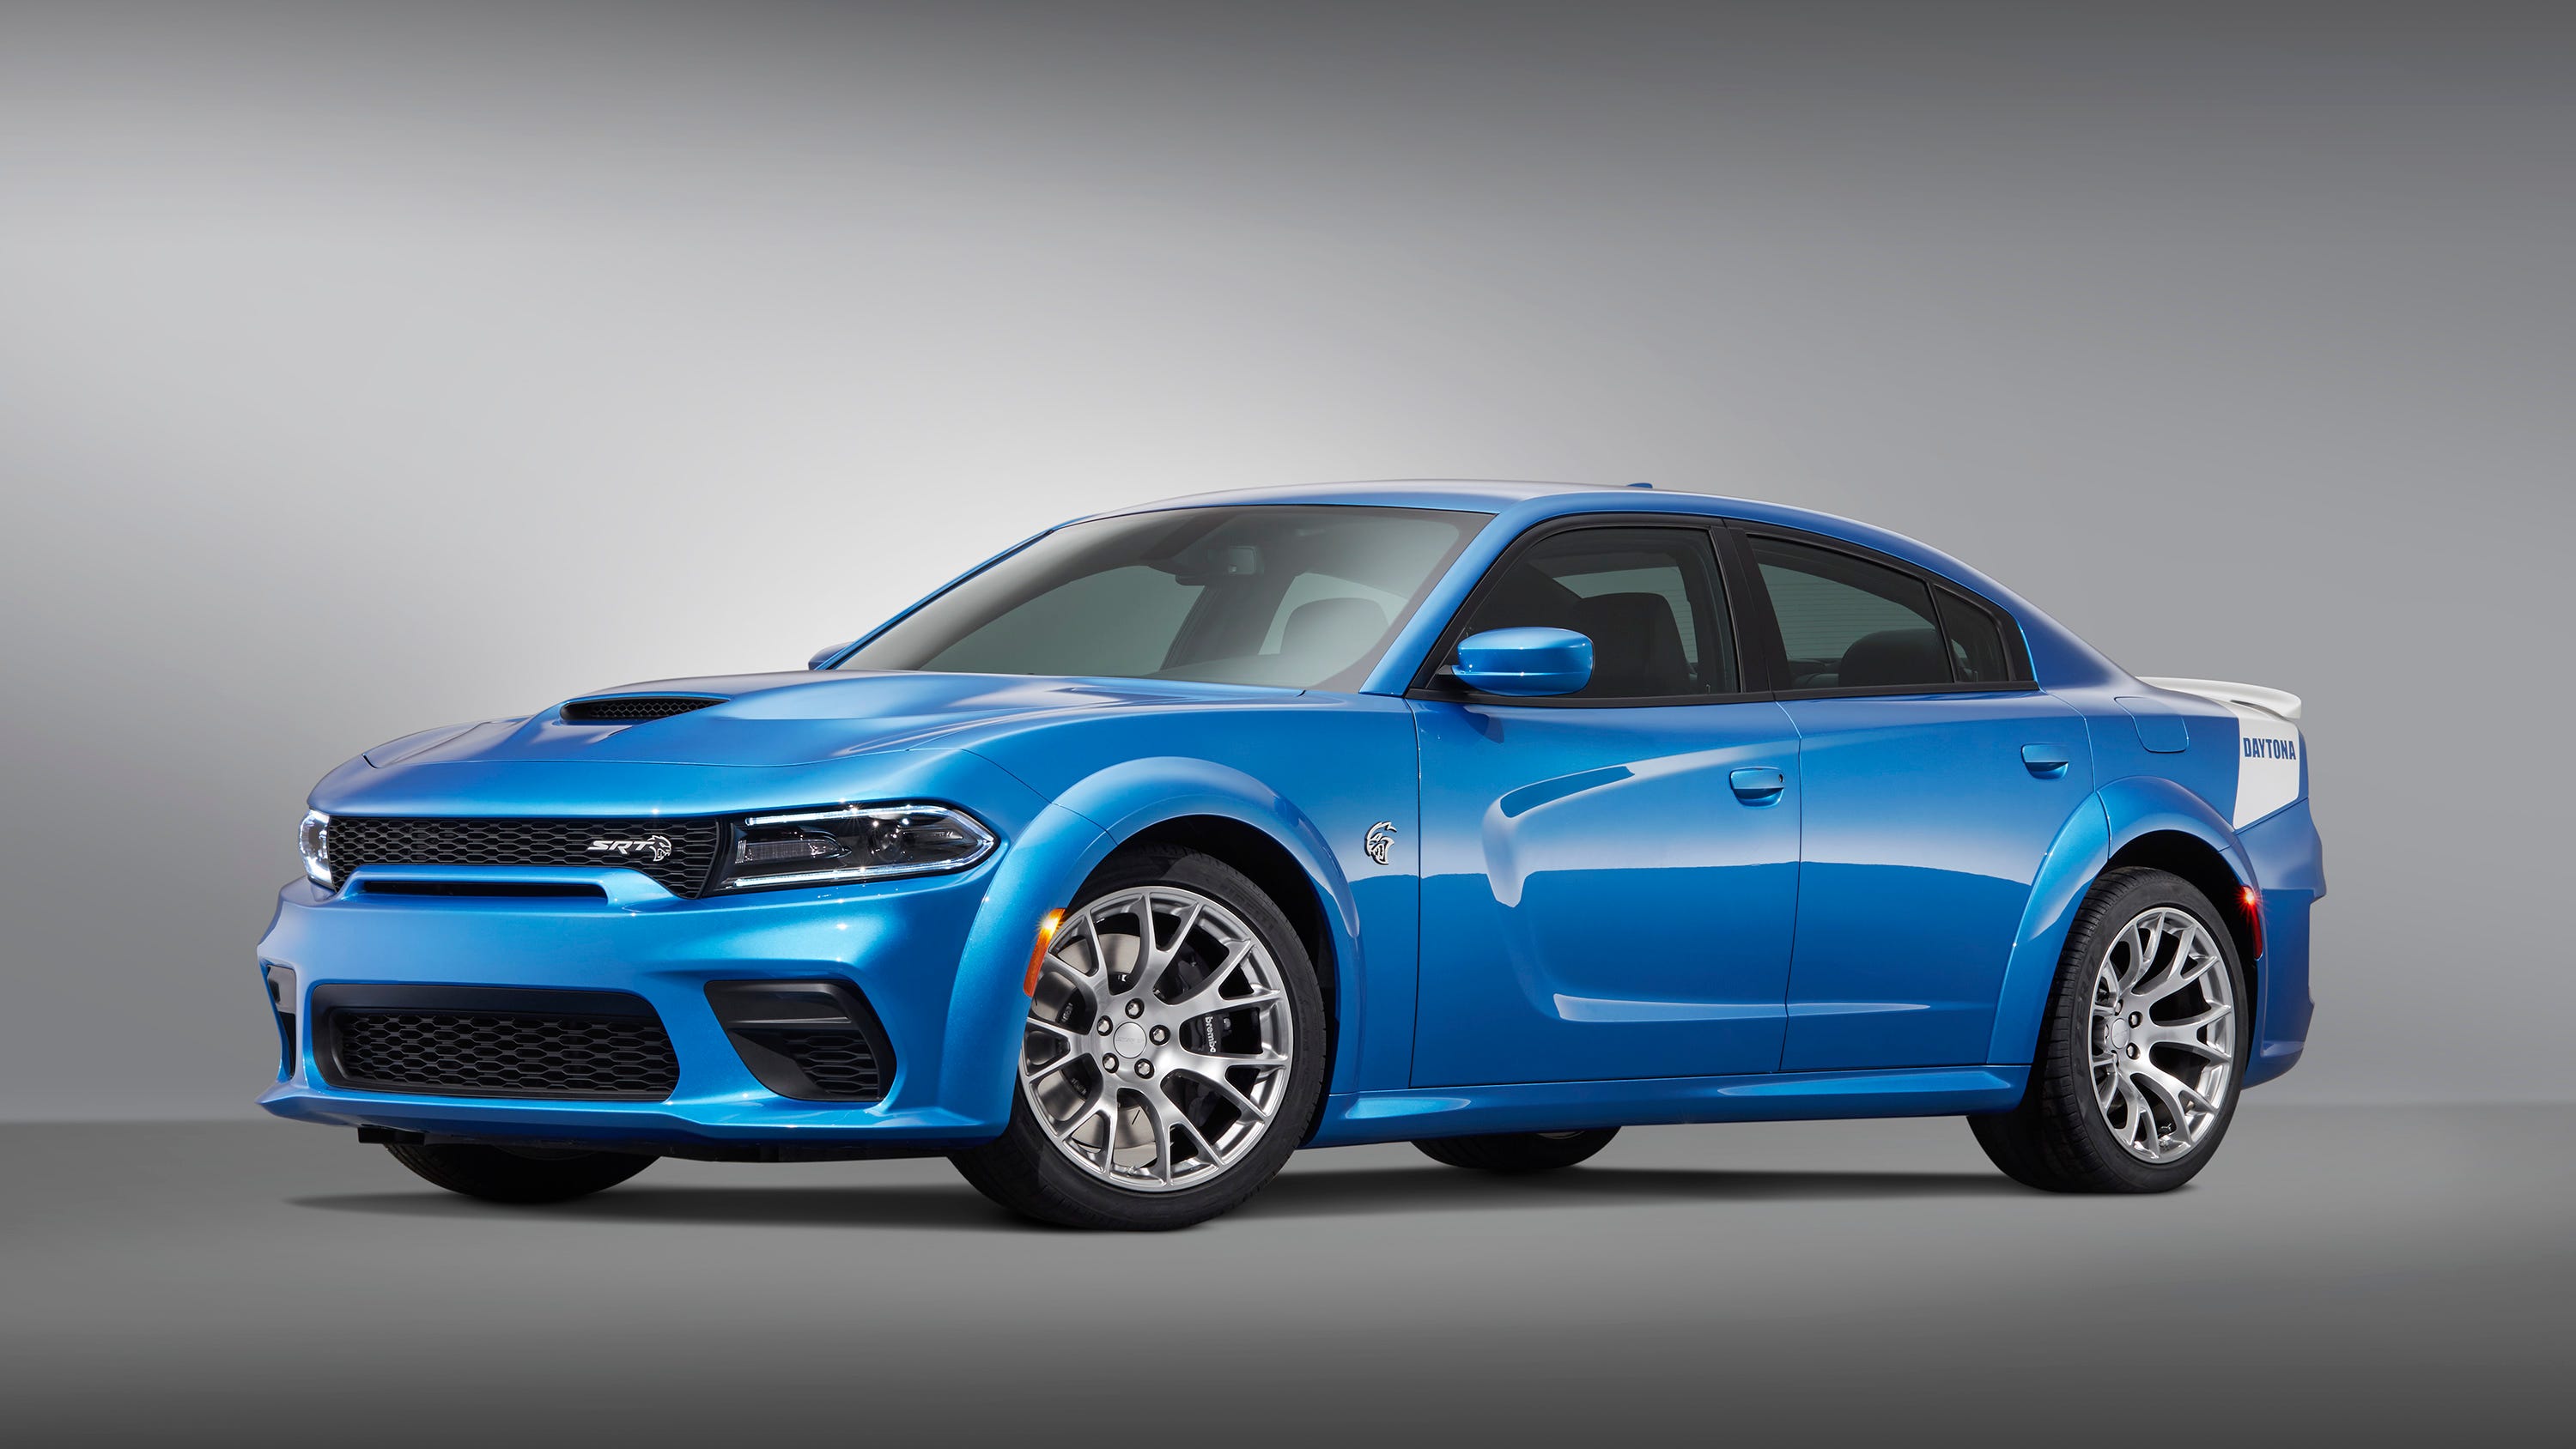 2020 dodge charger lineup pricing released 2020 dodge charger lineup pricing released